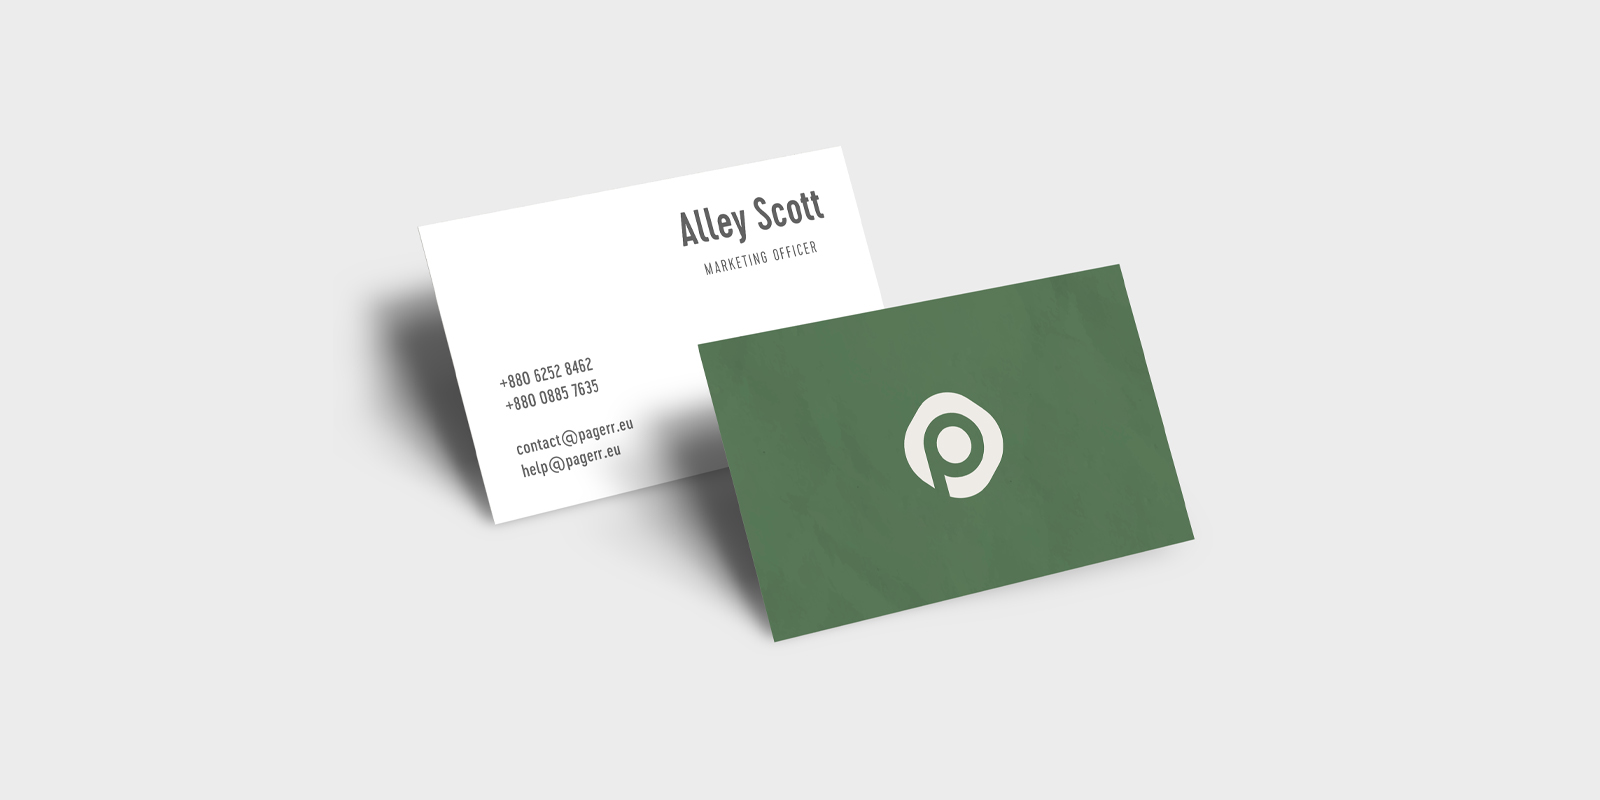 Simple business cards in Berlin - Print with Pagerr